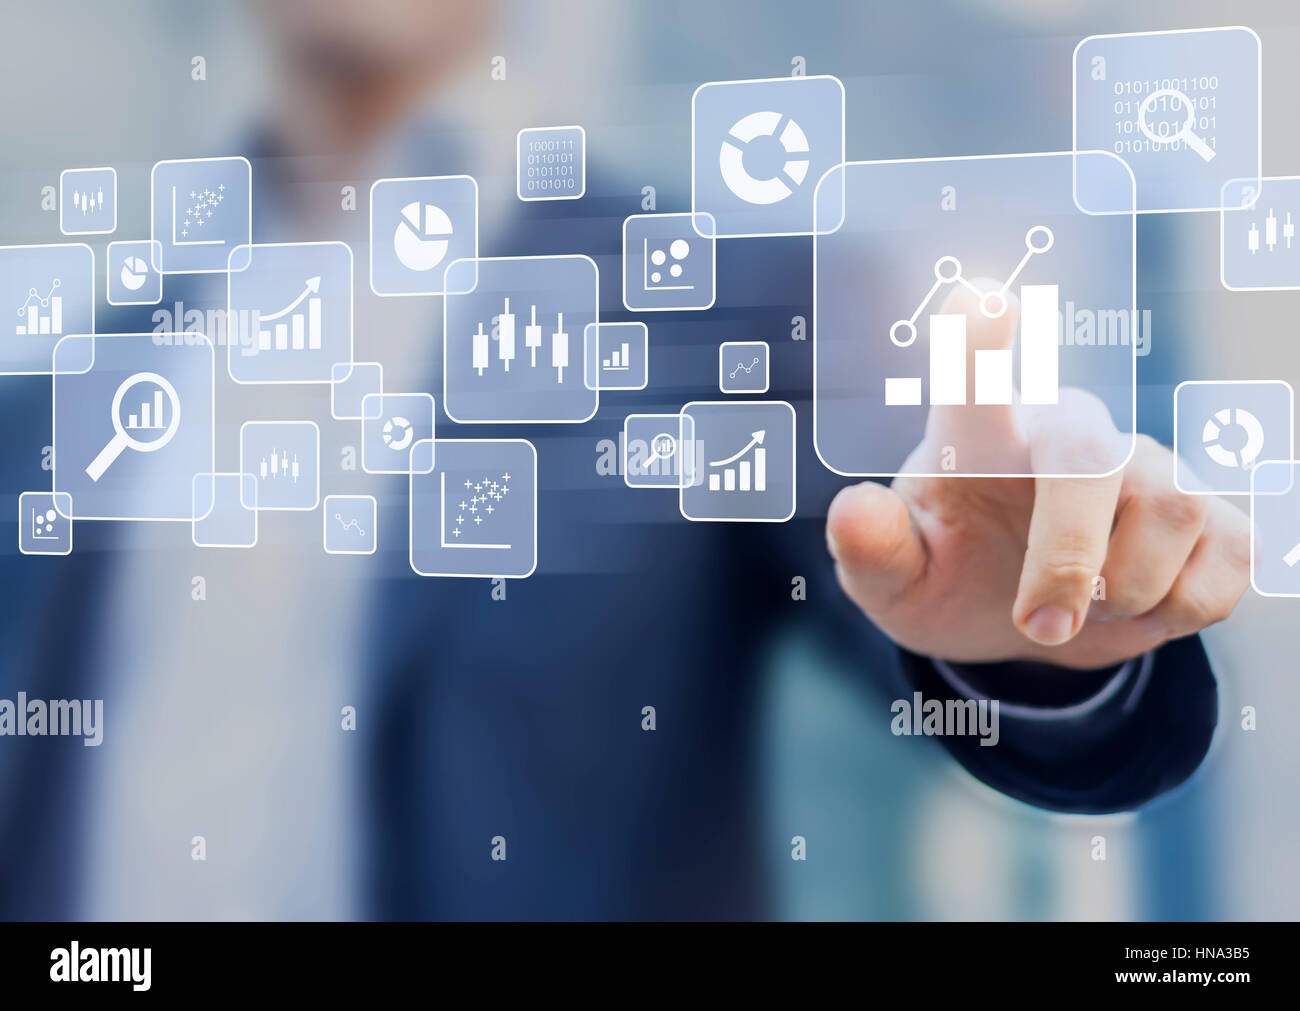 Big data analytics and business intelligence (BI) concept with chart and graph icons on a digital screen interface and a businessman in background Stock Photo